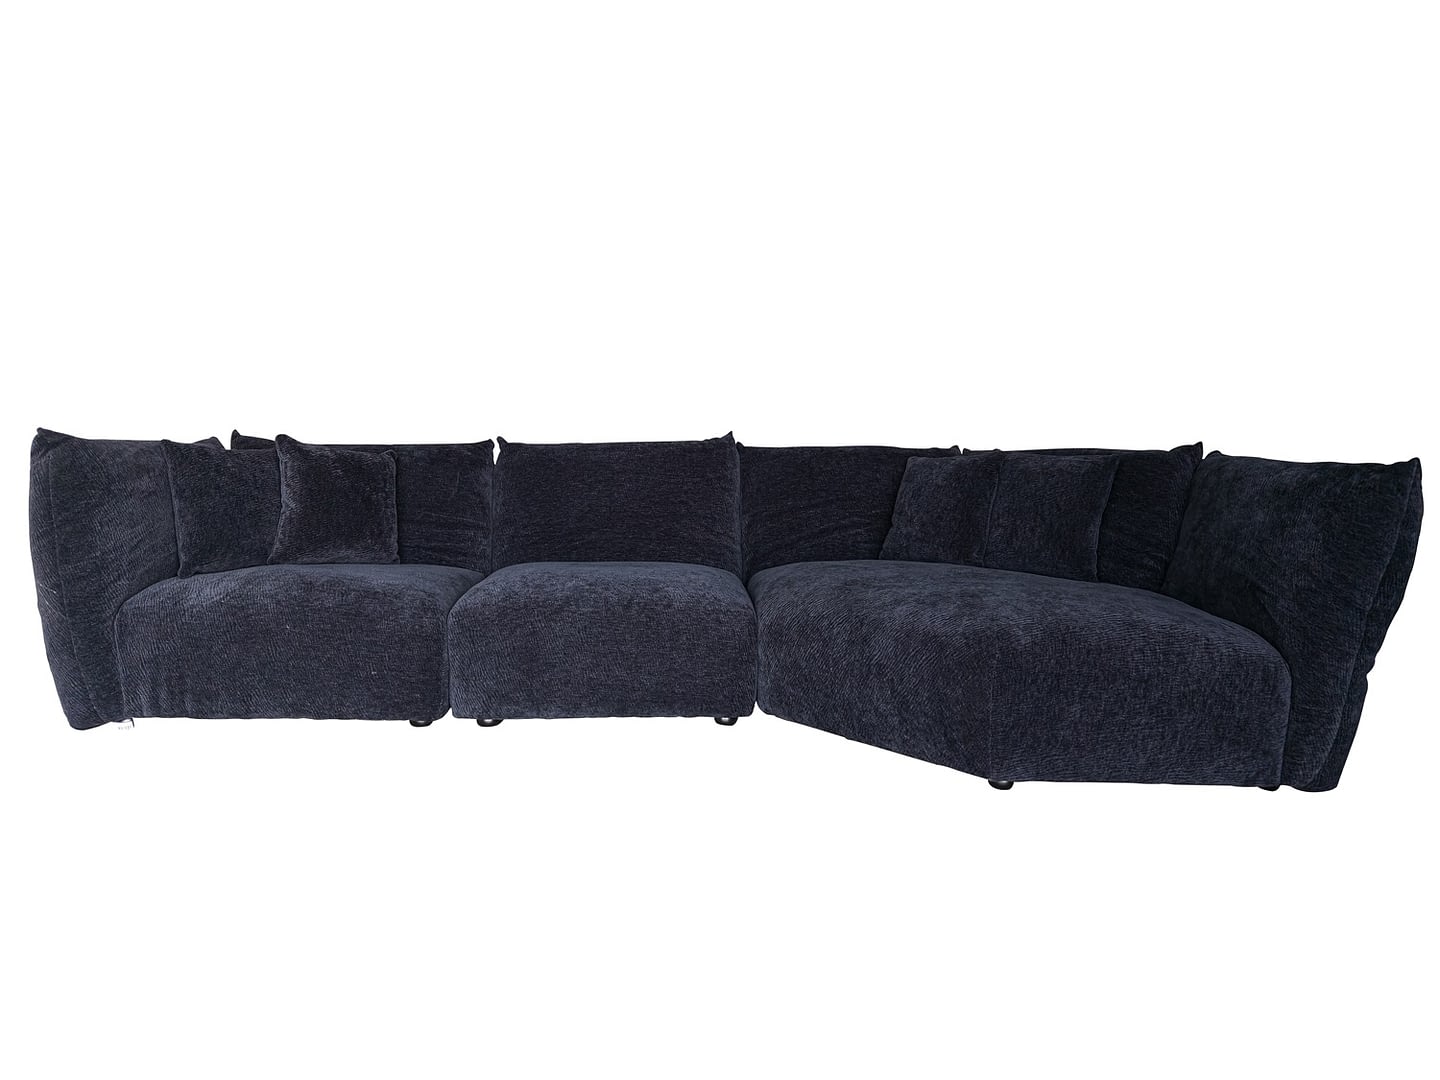 ZUMBROTA Sectional - Front